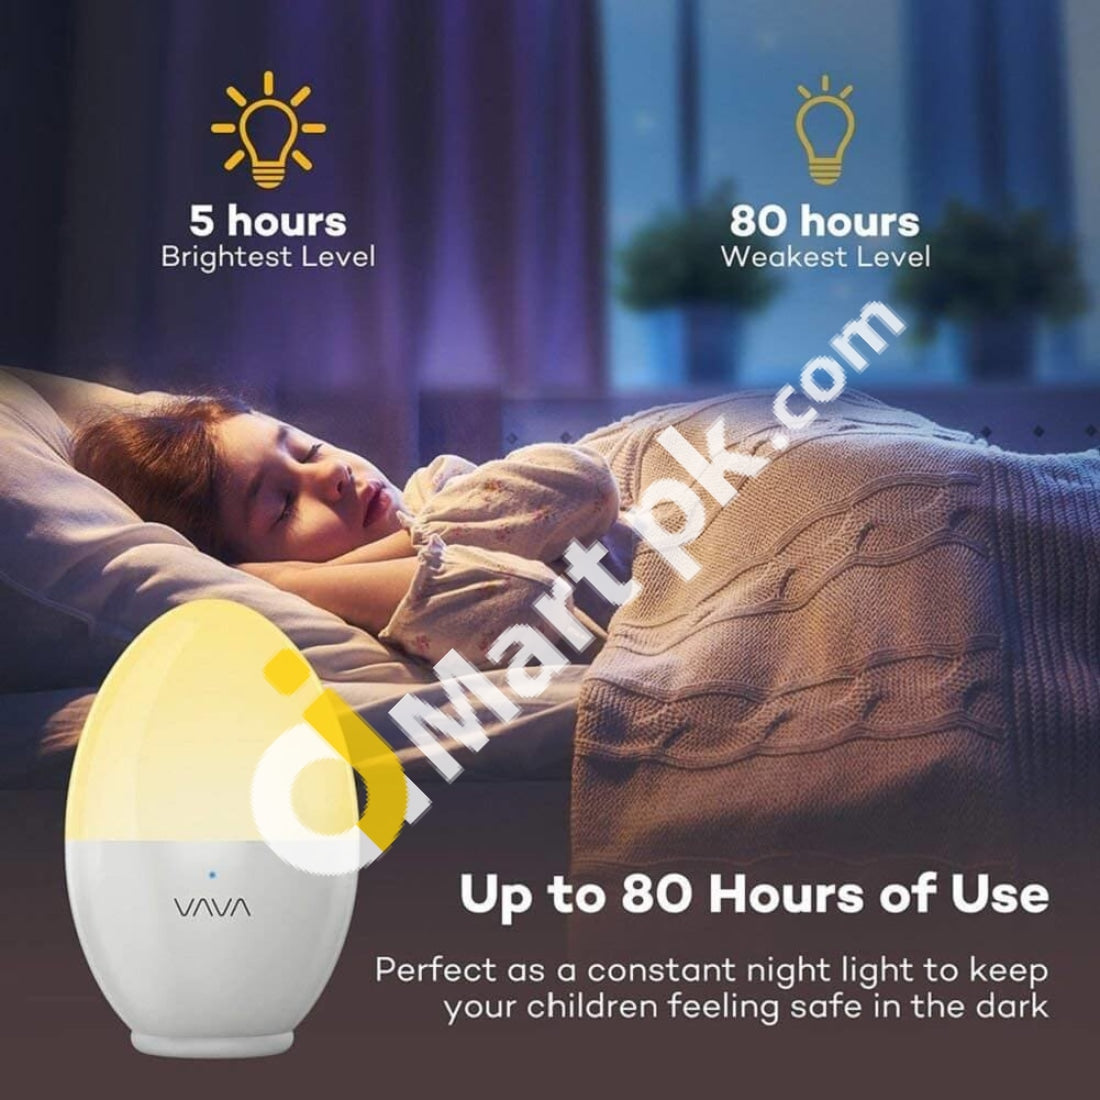 Vava Night Lights For Babies Touch Control Ip65 Waterproof Eye Caring Bedside Lamp With Adjustable